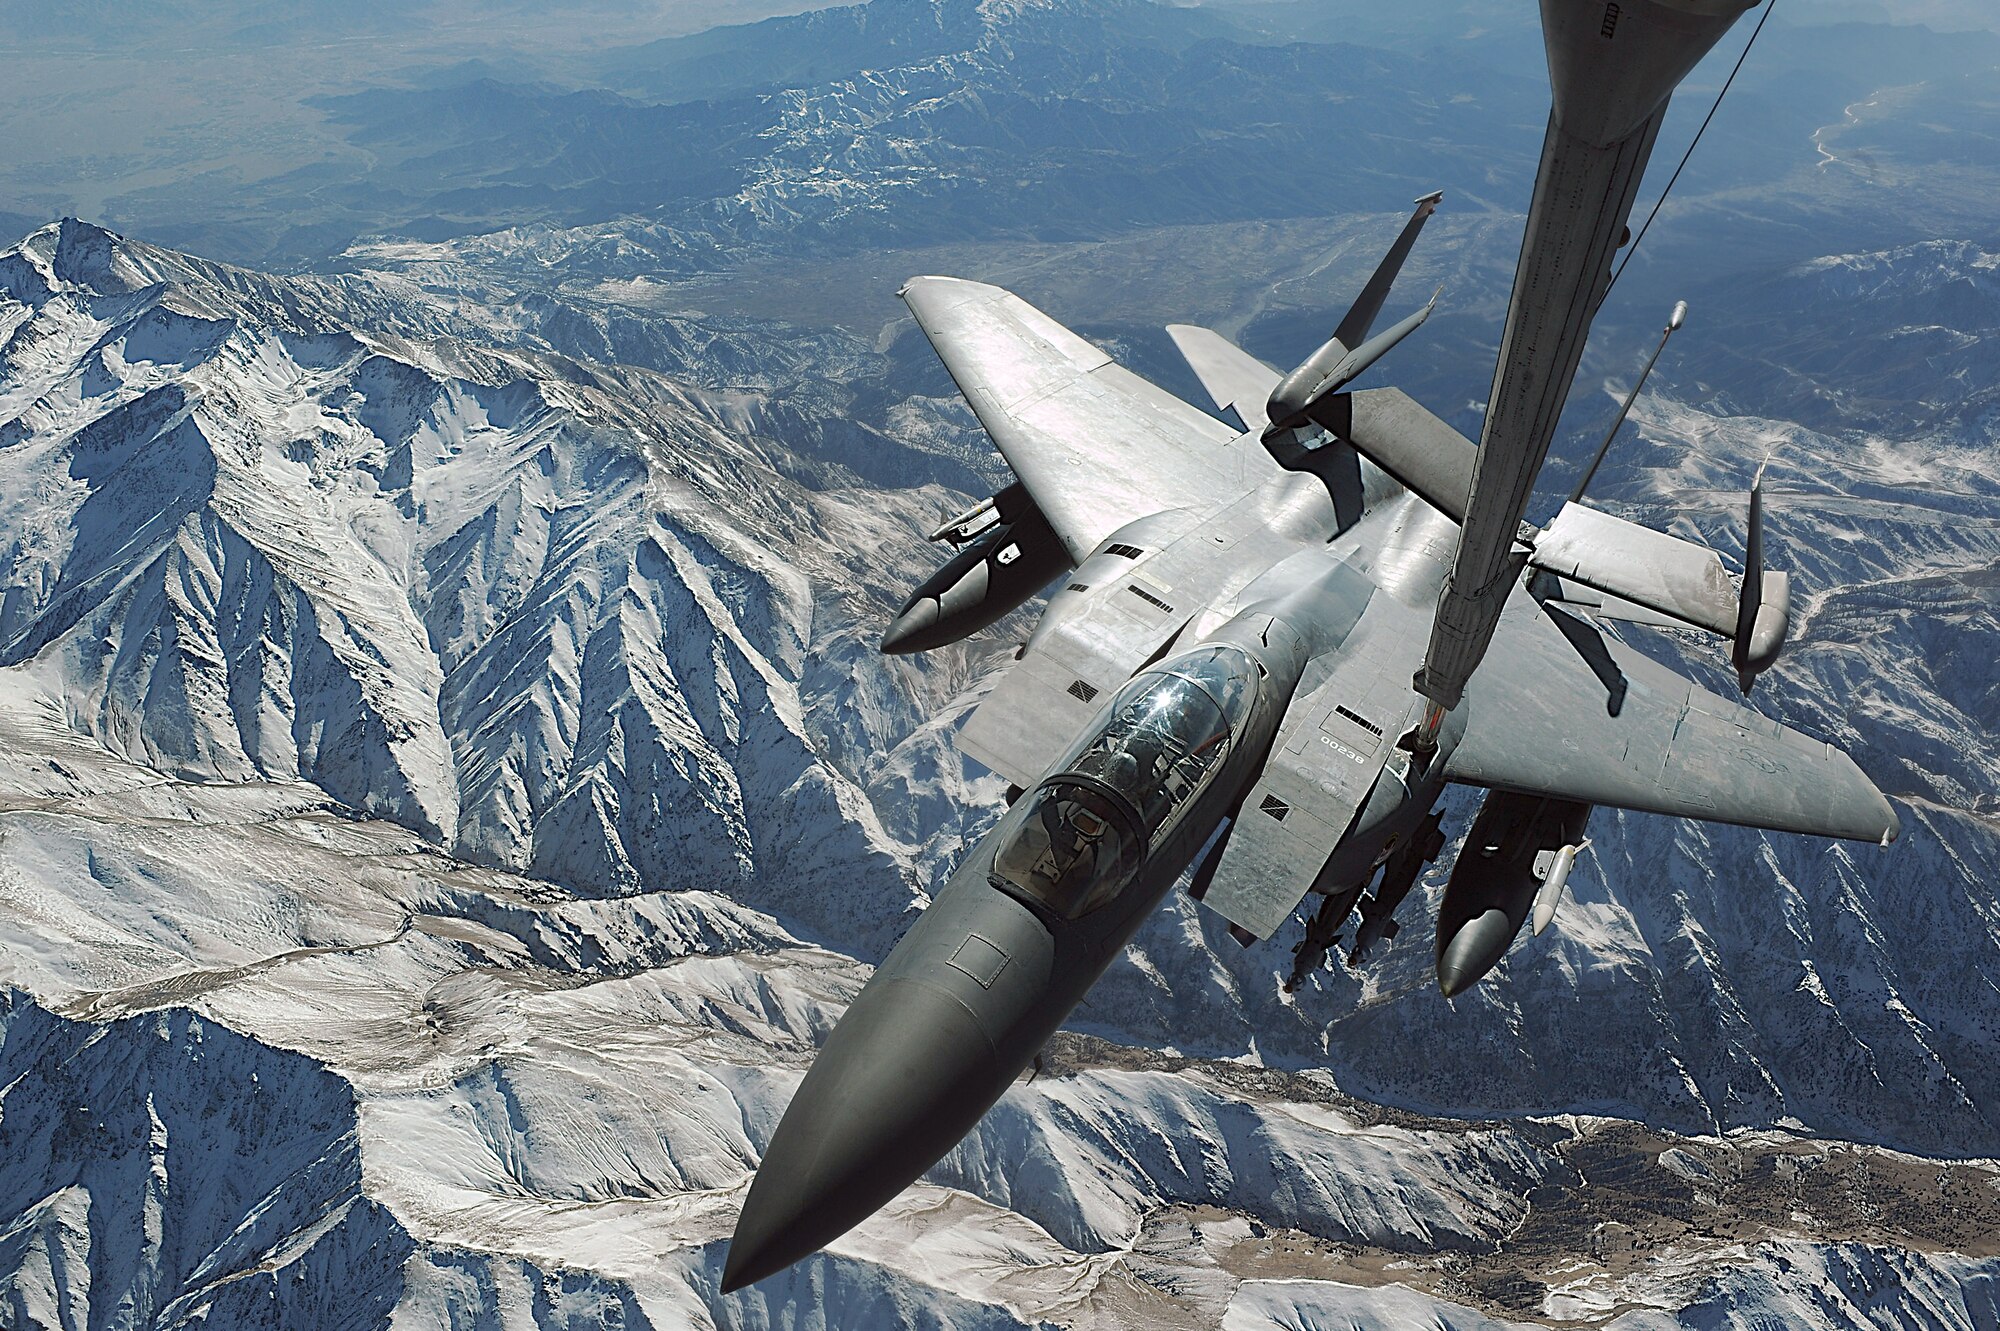 A KC-10 Extender from the 908th Expeditionary Aerial Refueling Squadron refuels a F-15E Strike Eagle from the 391st Expeditionary Fighter Squadron Dec. 11 over Afghanistan.  The KC-10 holds six tanks that carry more than 356,000 pounds of fuel. (U.S. Air Force photo/Staff Sgt. Aaron Allmon) 
